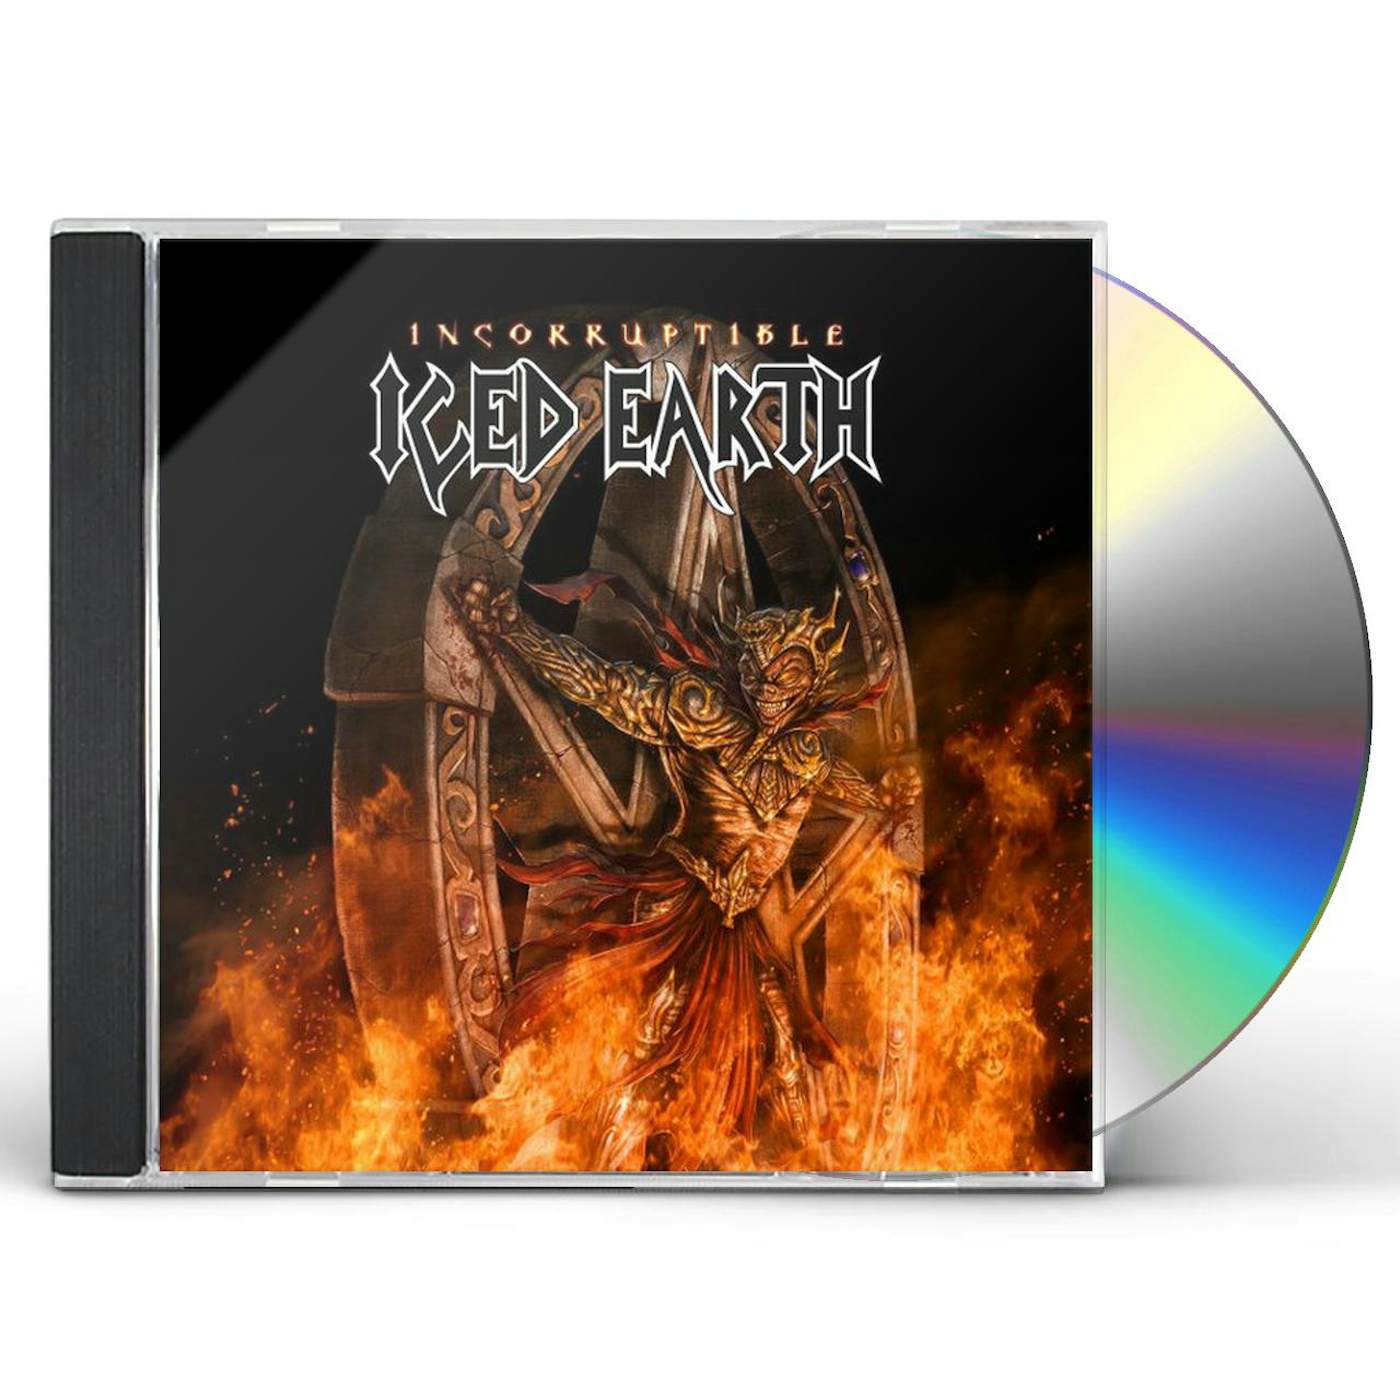 Iced Earth INCORRUPTIBLE CD